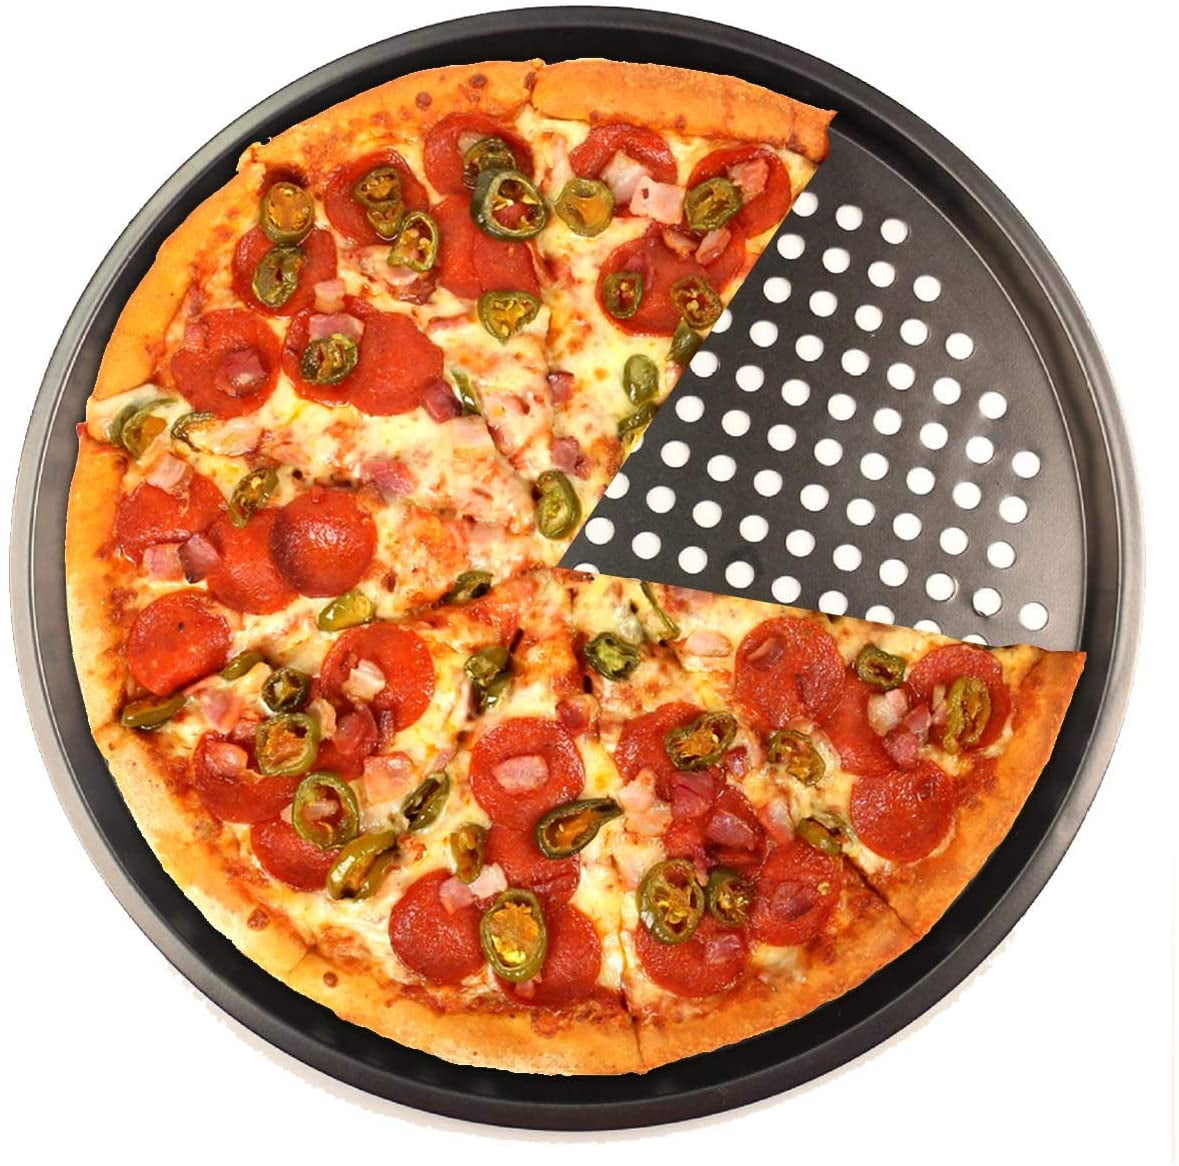 Pizza, cookies and pies cutter with plastic toothed blade - 88mm